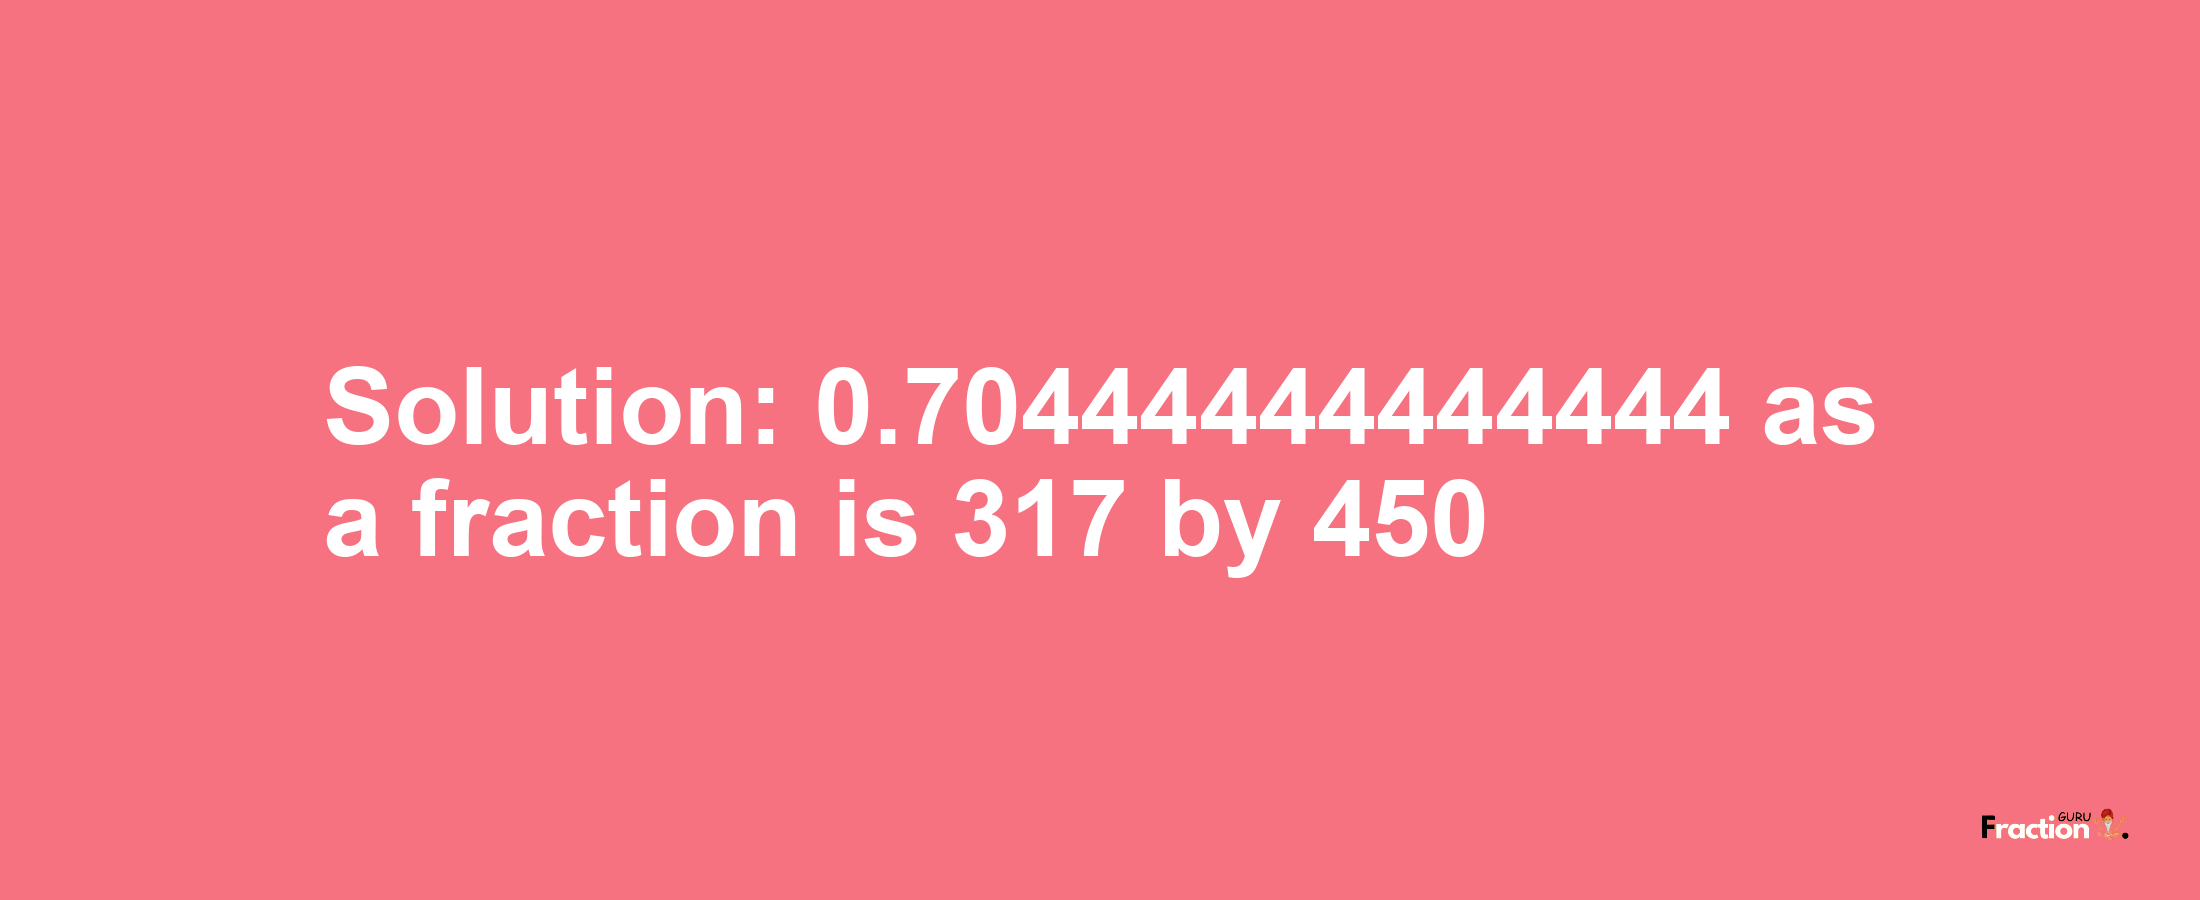 Solution:0.70444444444444 as a fraction is 317/450